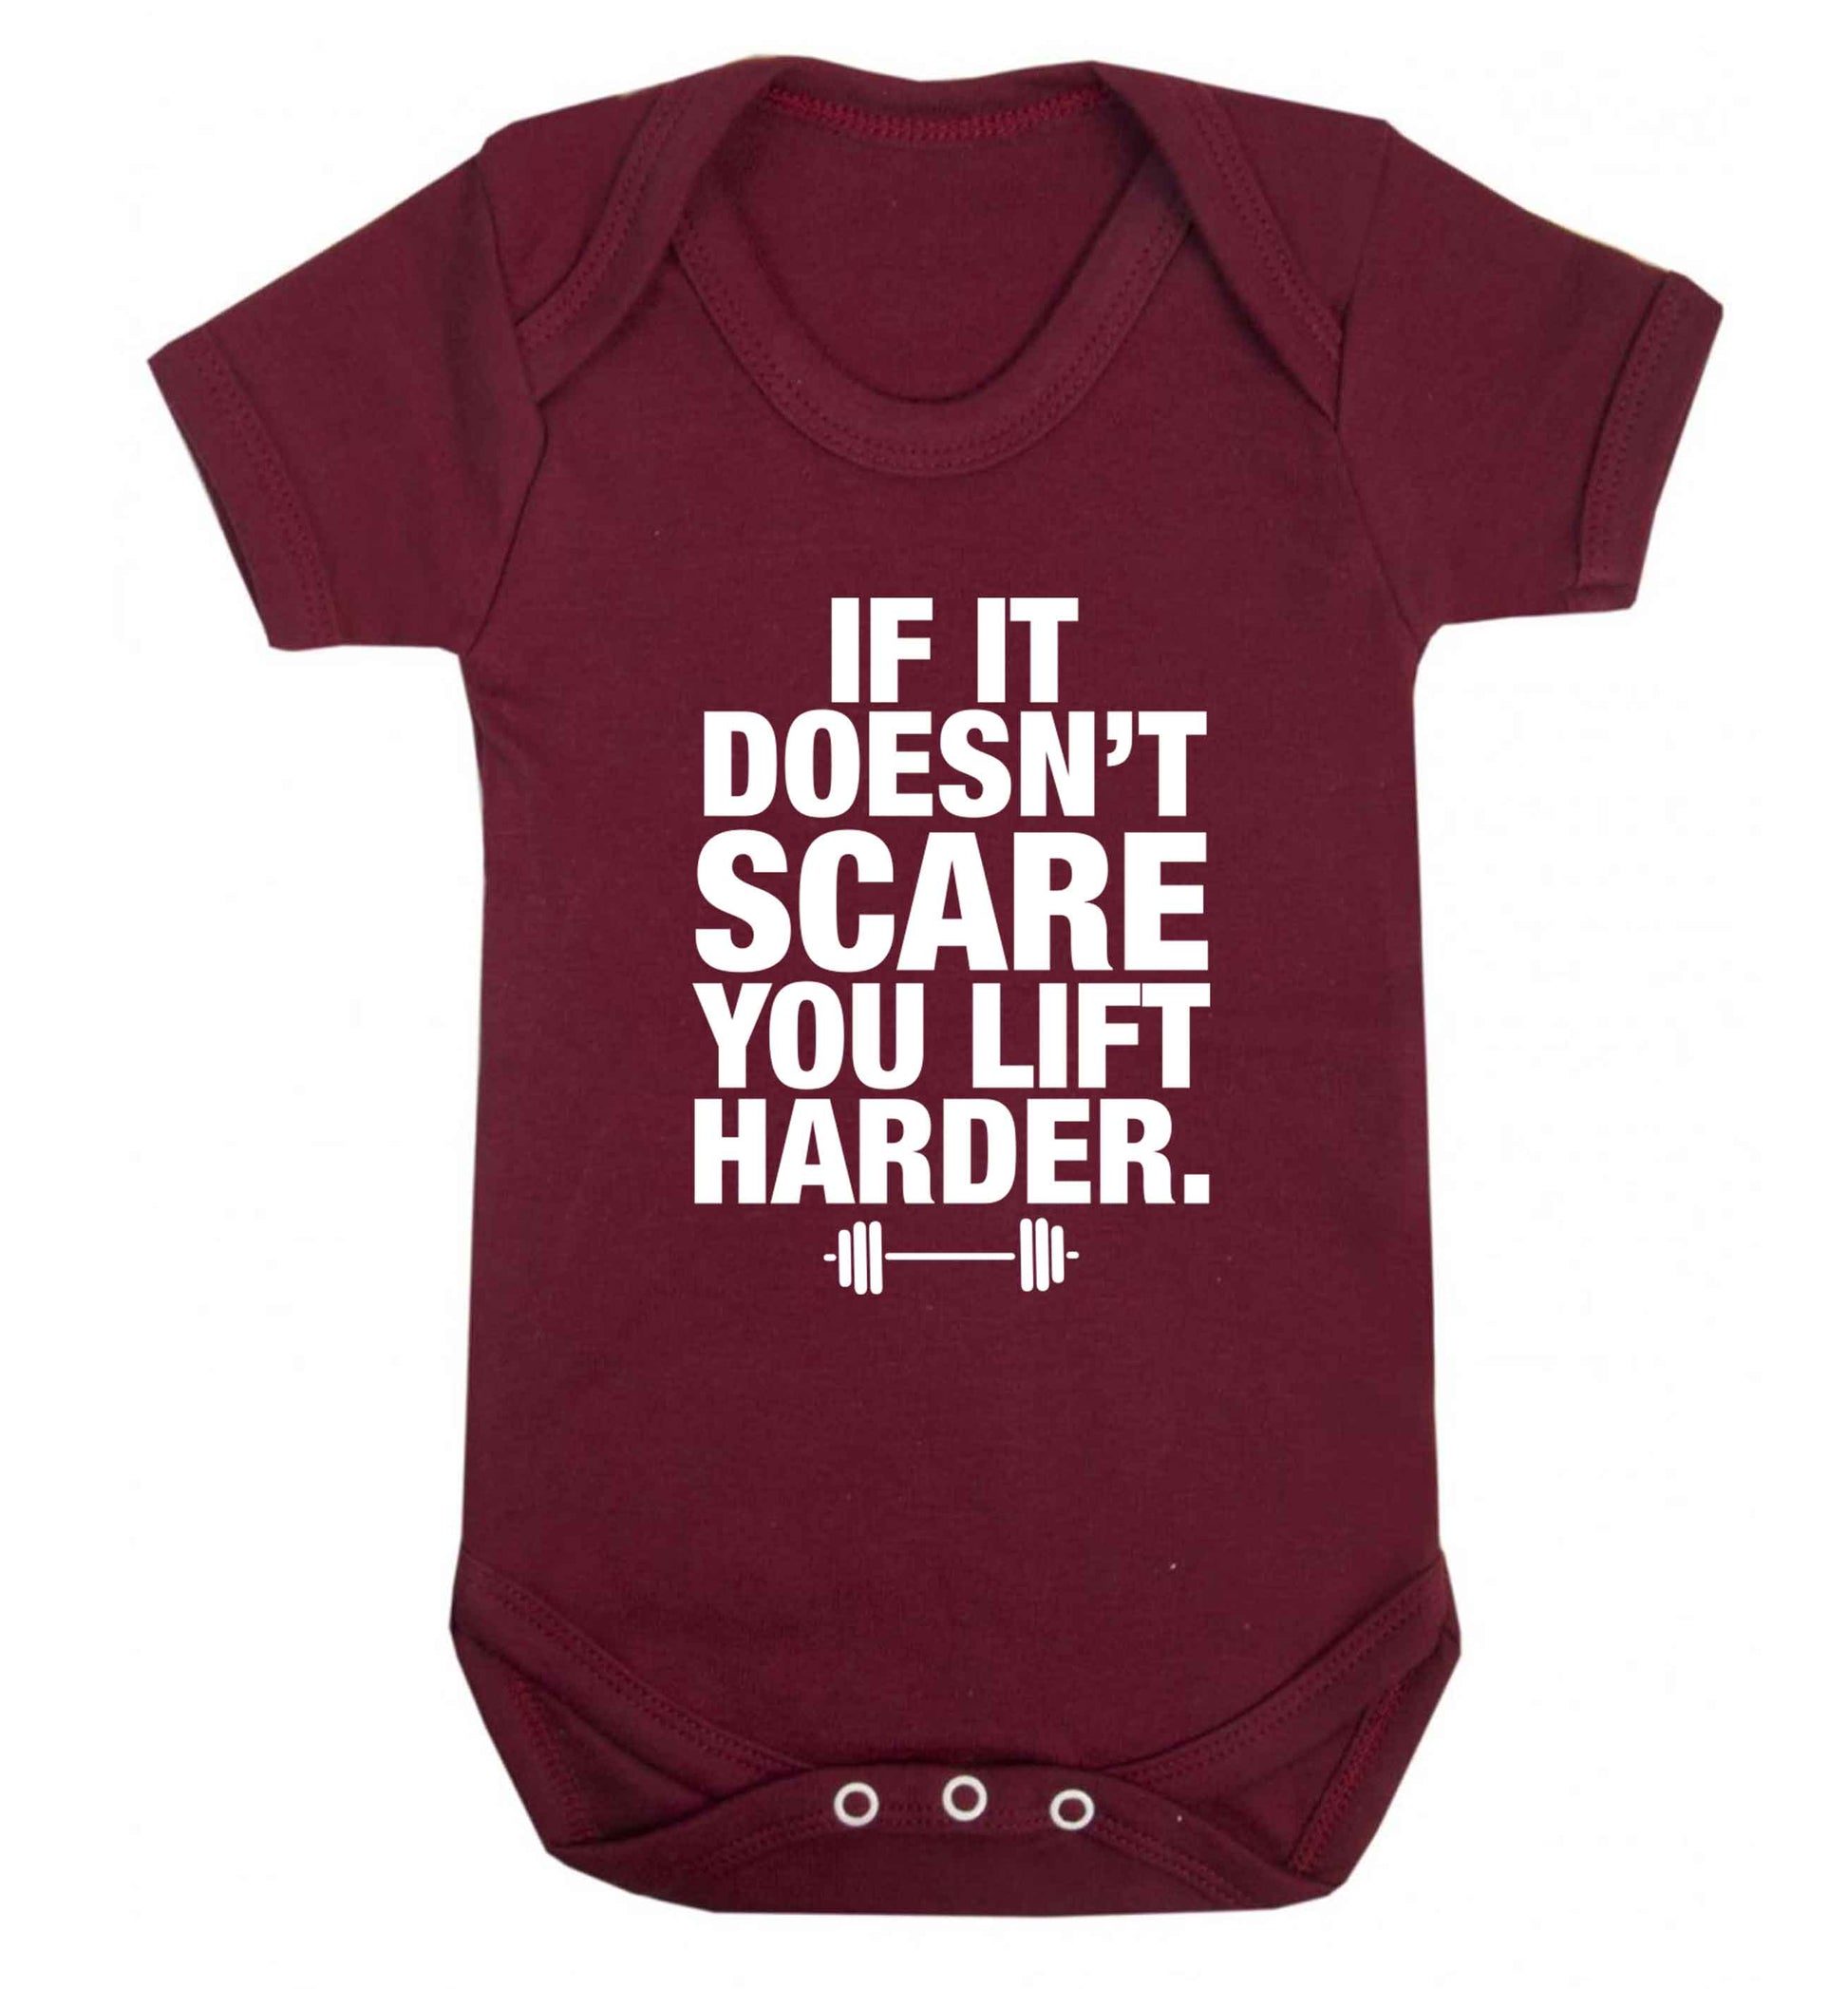 If it doesnt' scare you lift harder Baby Vest maroon 18-24 months